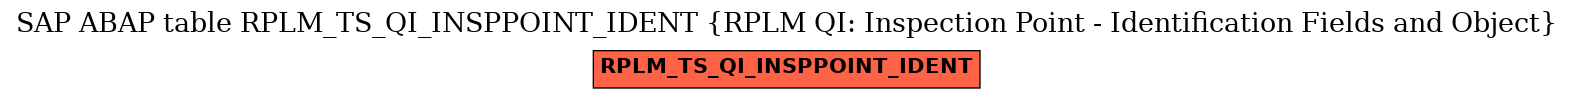 E-R Diagram for table RPLM_TS_QI_INSPPOINT_IDENT (RPLM QI: Inspection Point - Identification Fields and Object)